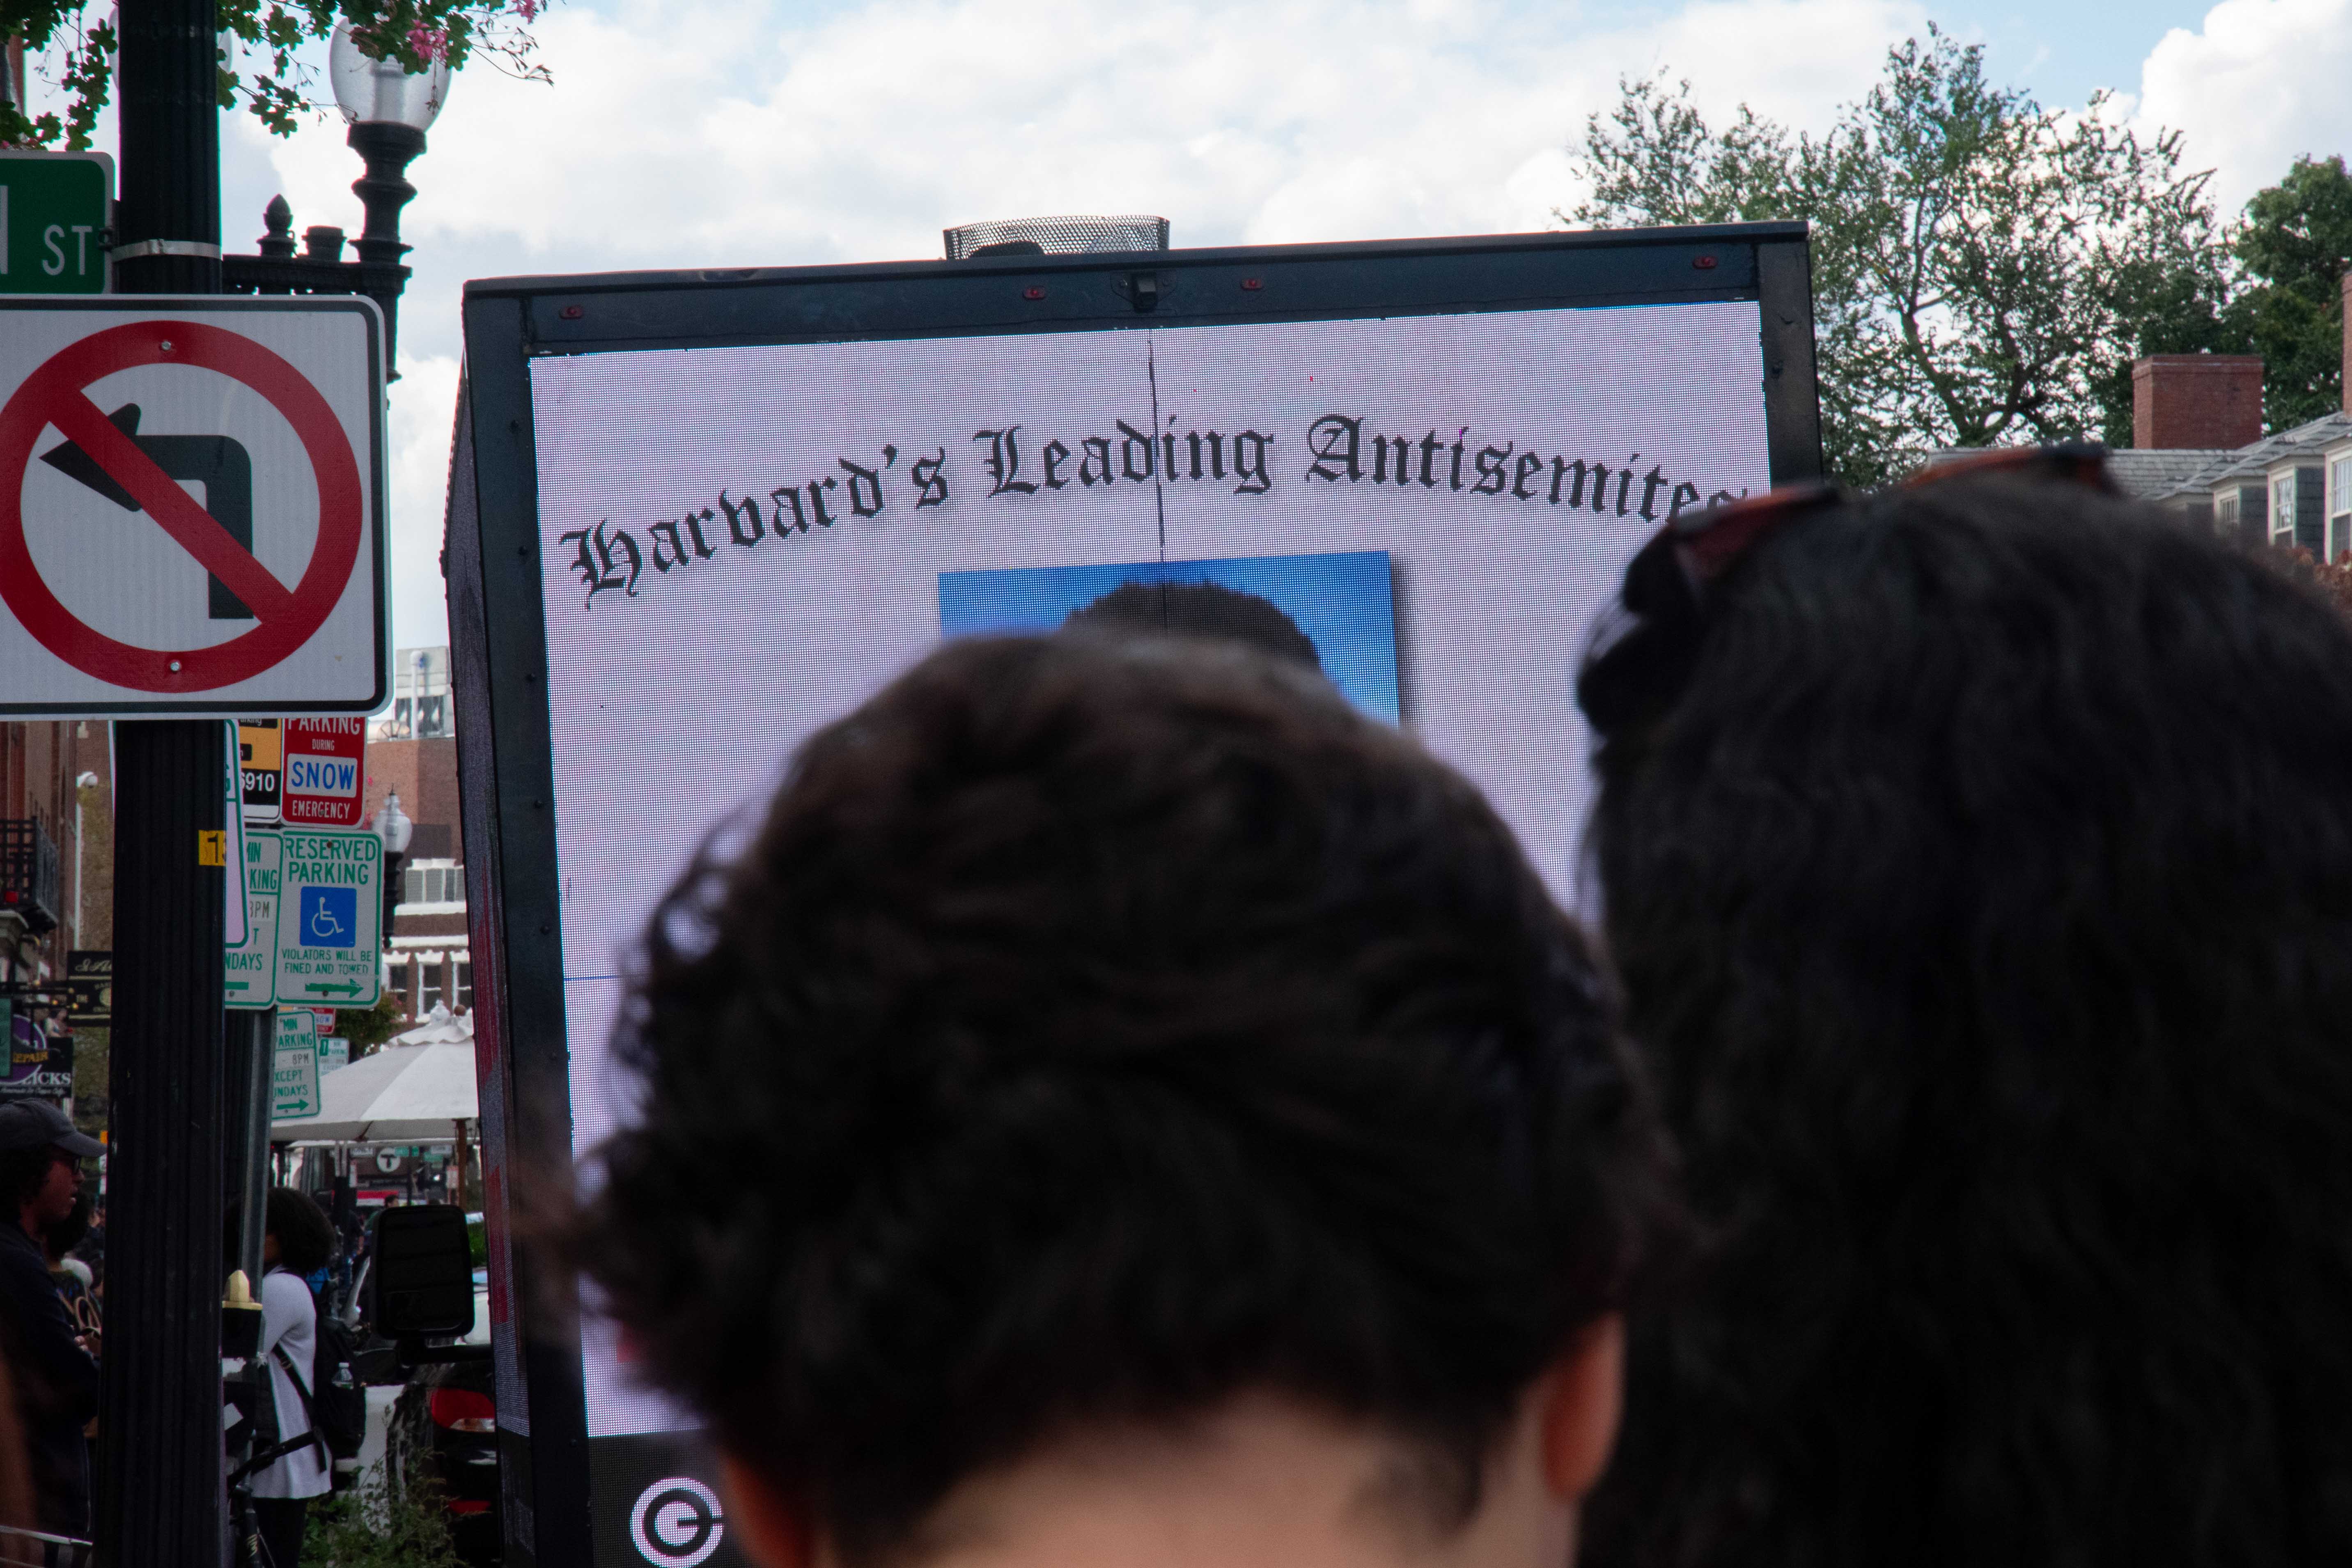 Passers-by observe a billboard truck digitally displaying the names and faces of students allegedly affiliated with student groups that signed onto a controversial statement blaming Israel for the Oct. 7 attacks.